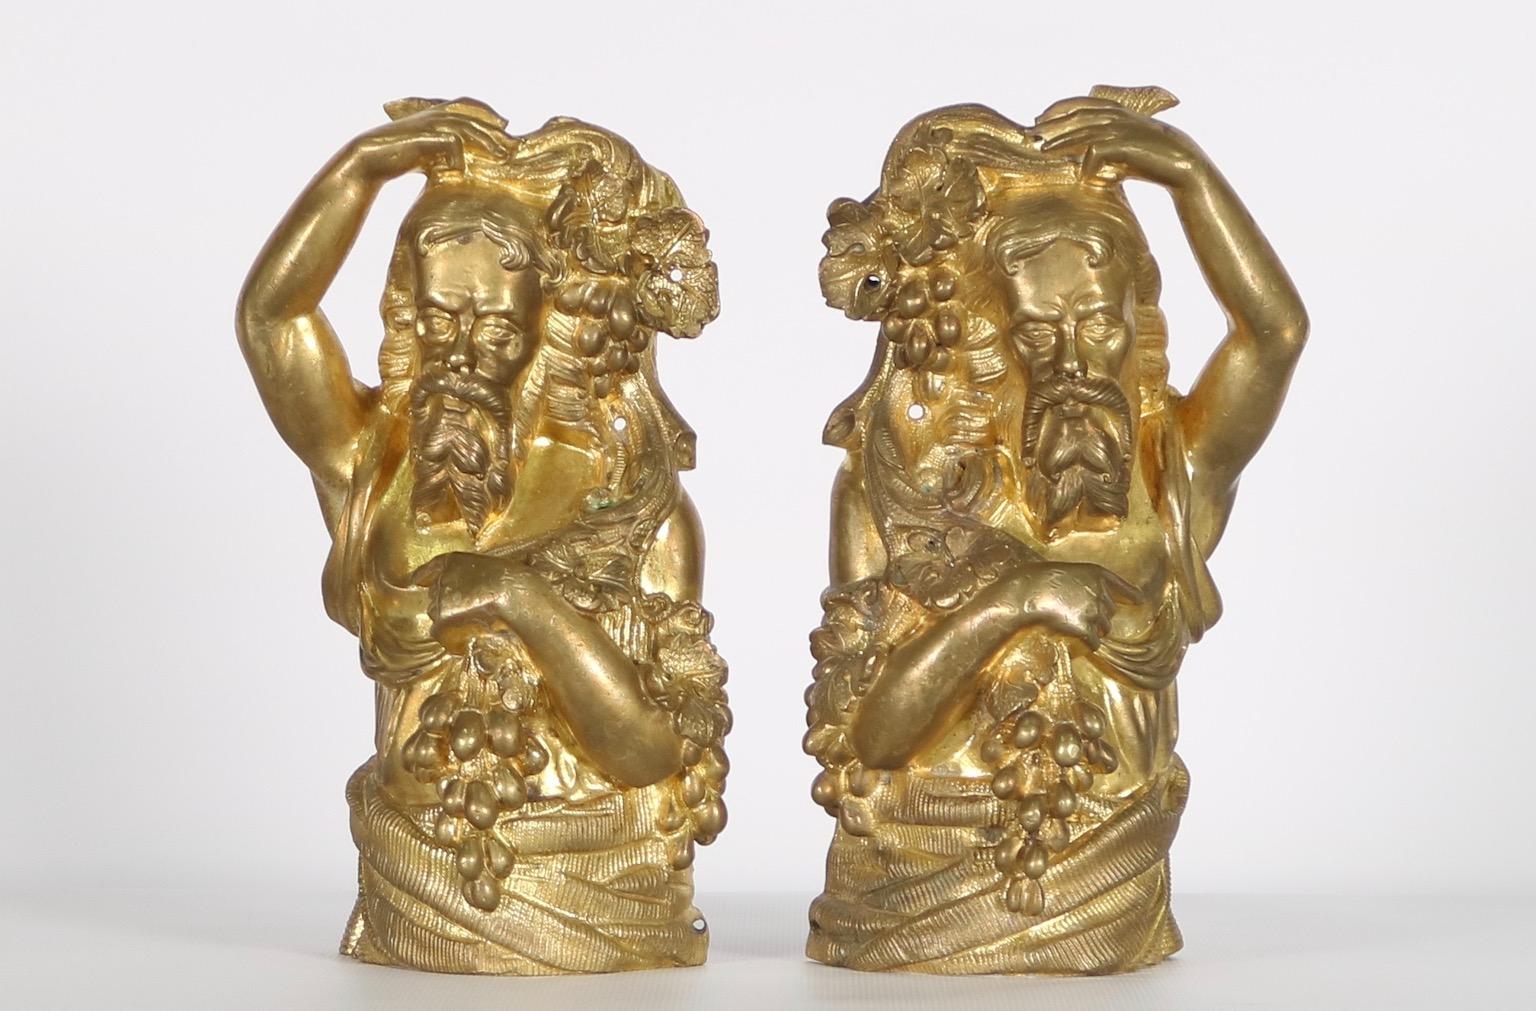 Neoclassical bronze ormolu French finials in the form of bearded men with grape motif. This pair dates from the 19th century and is in excellent vintage condition. Each has wear consistent with age and use. 

Dimensions listed are per item.